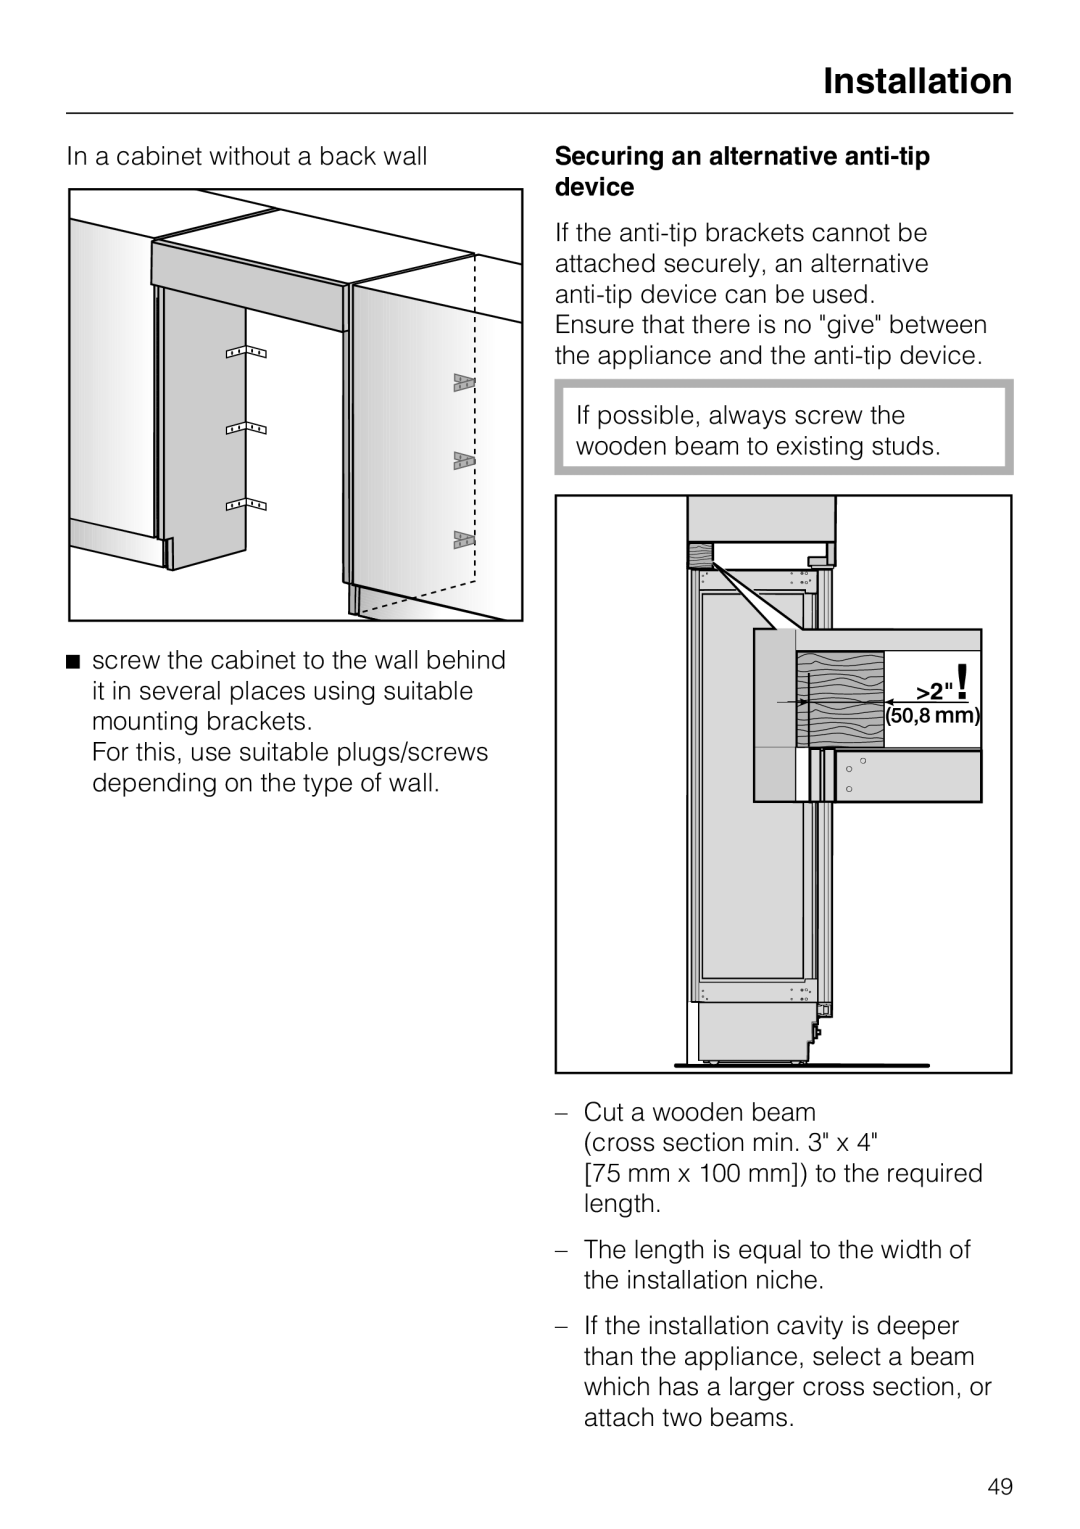 Miele KWT 1611 SF, KWT 1601 SF installation instructions Securing an alternative anti-tipdevice, Installation 